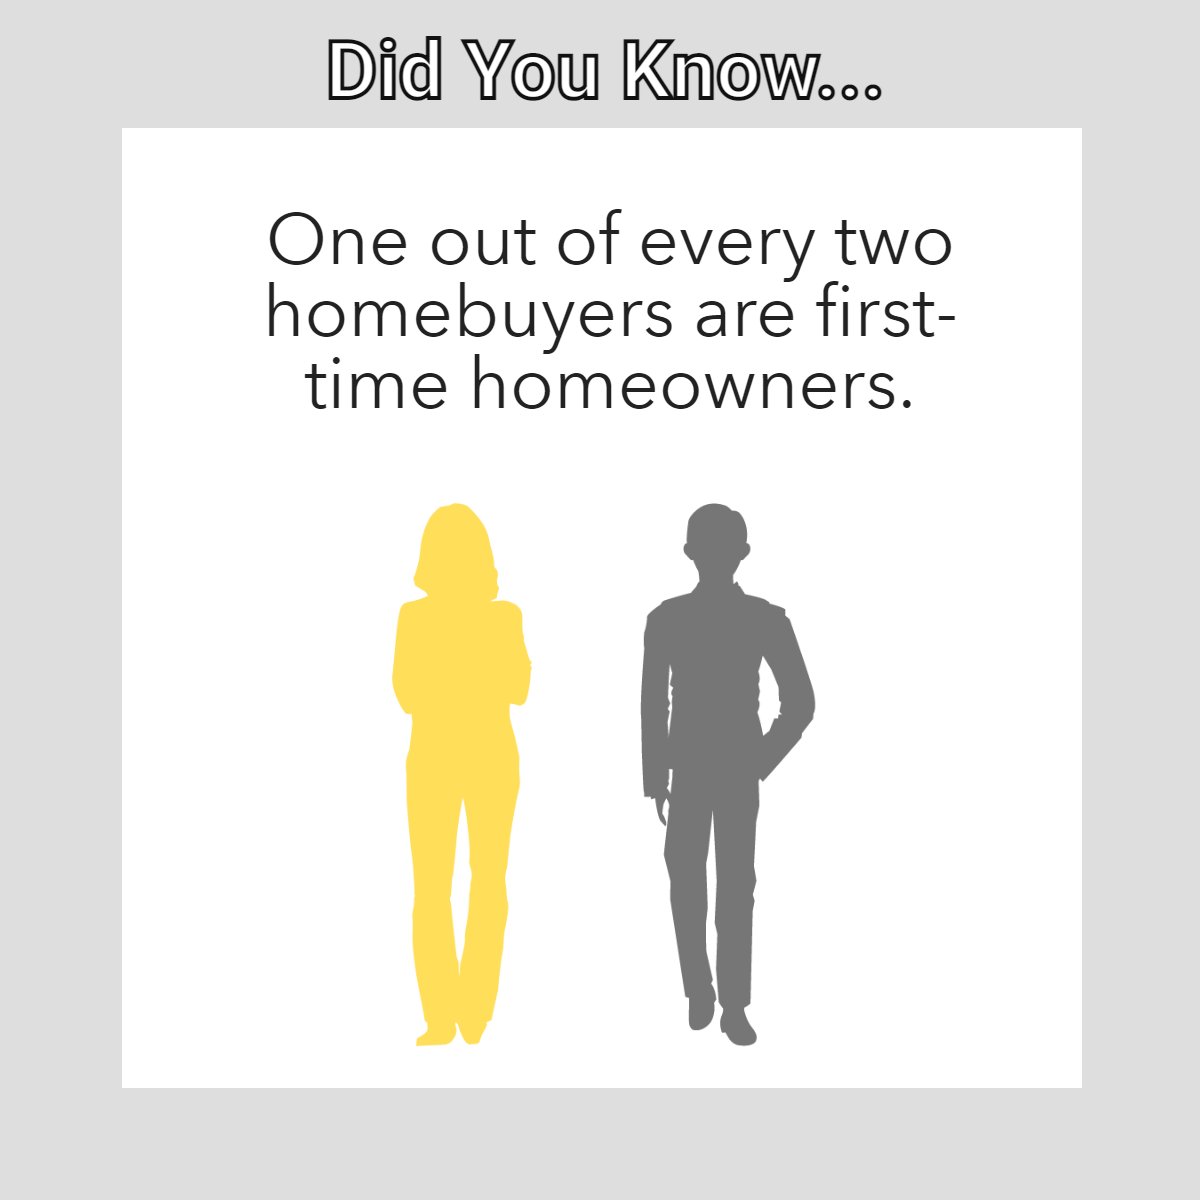 Did you know? One out of every two homebuyers is a first-time homeowner. 🤔

How old were you when you bought your first home? Are you still waiting? Drop us a line in the comments! 💭

#funfact #homeowner #homebuyer #buyers #buying #seller #selling

 #AndreaDavis